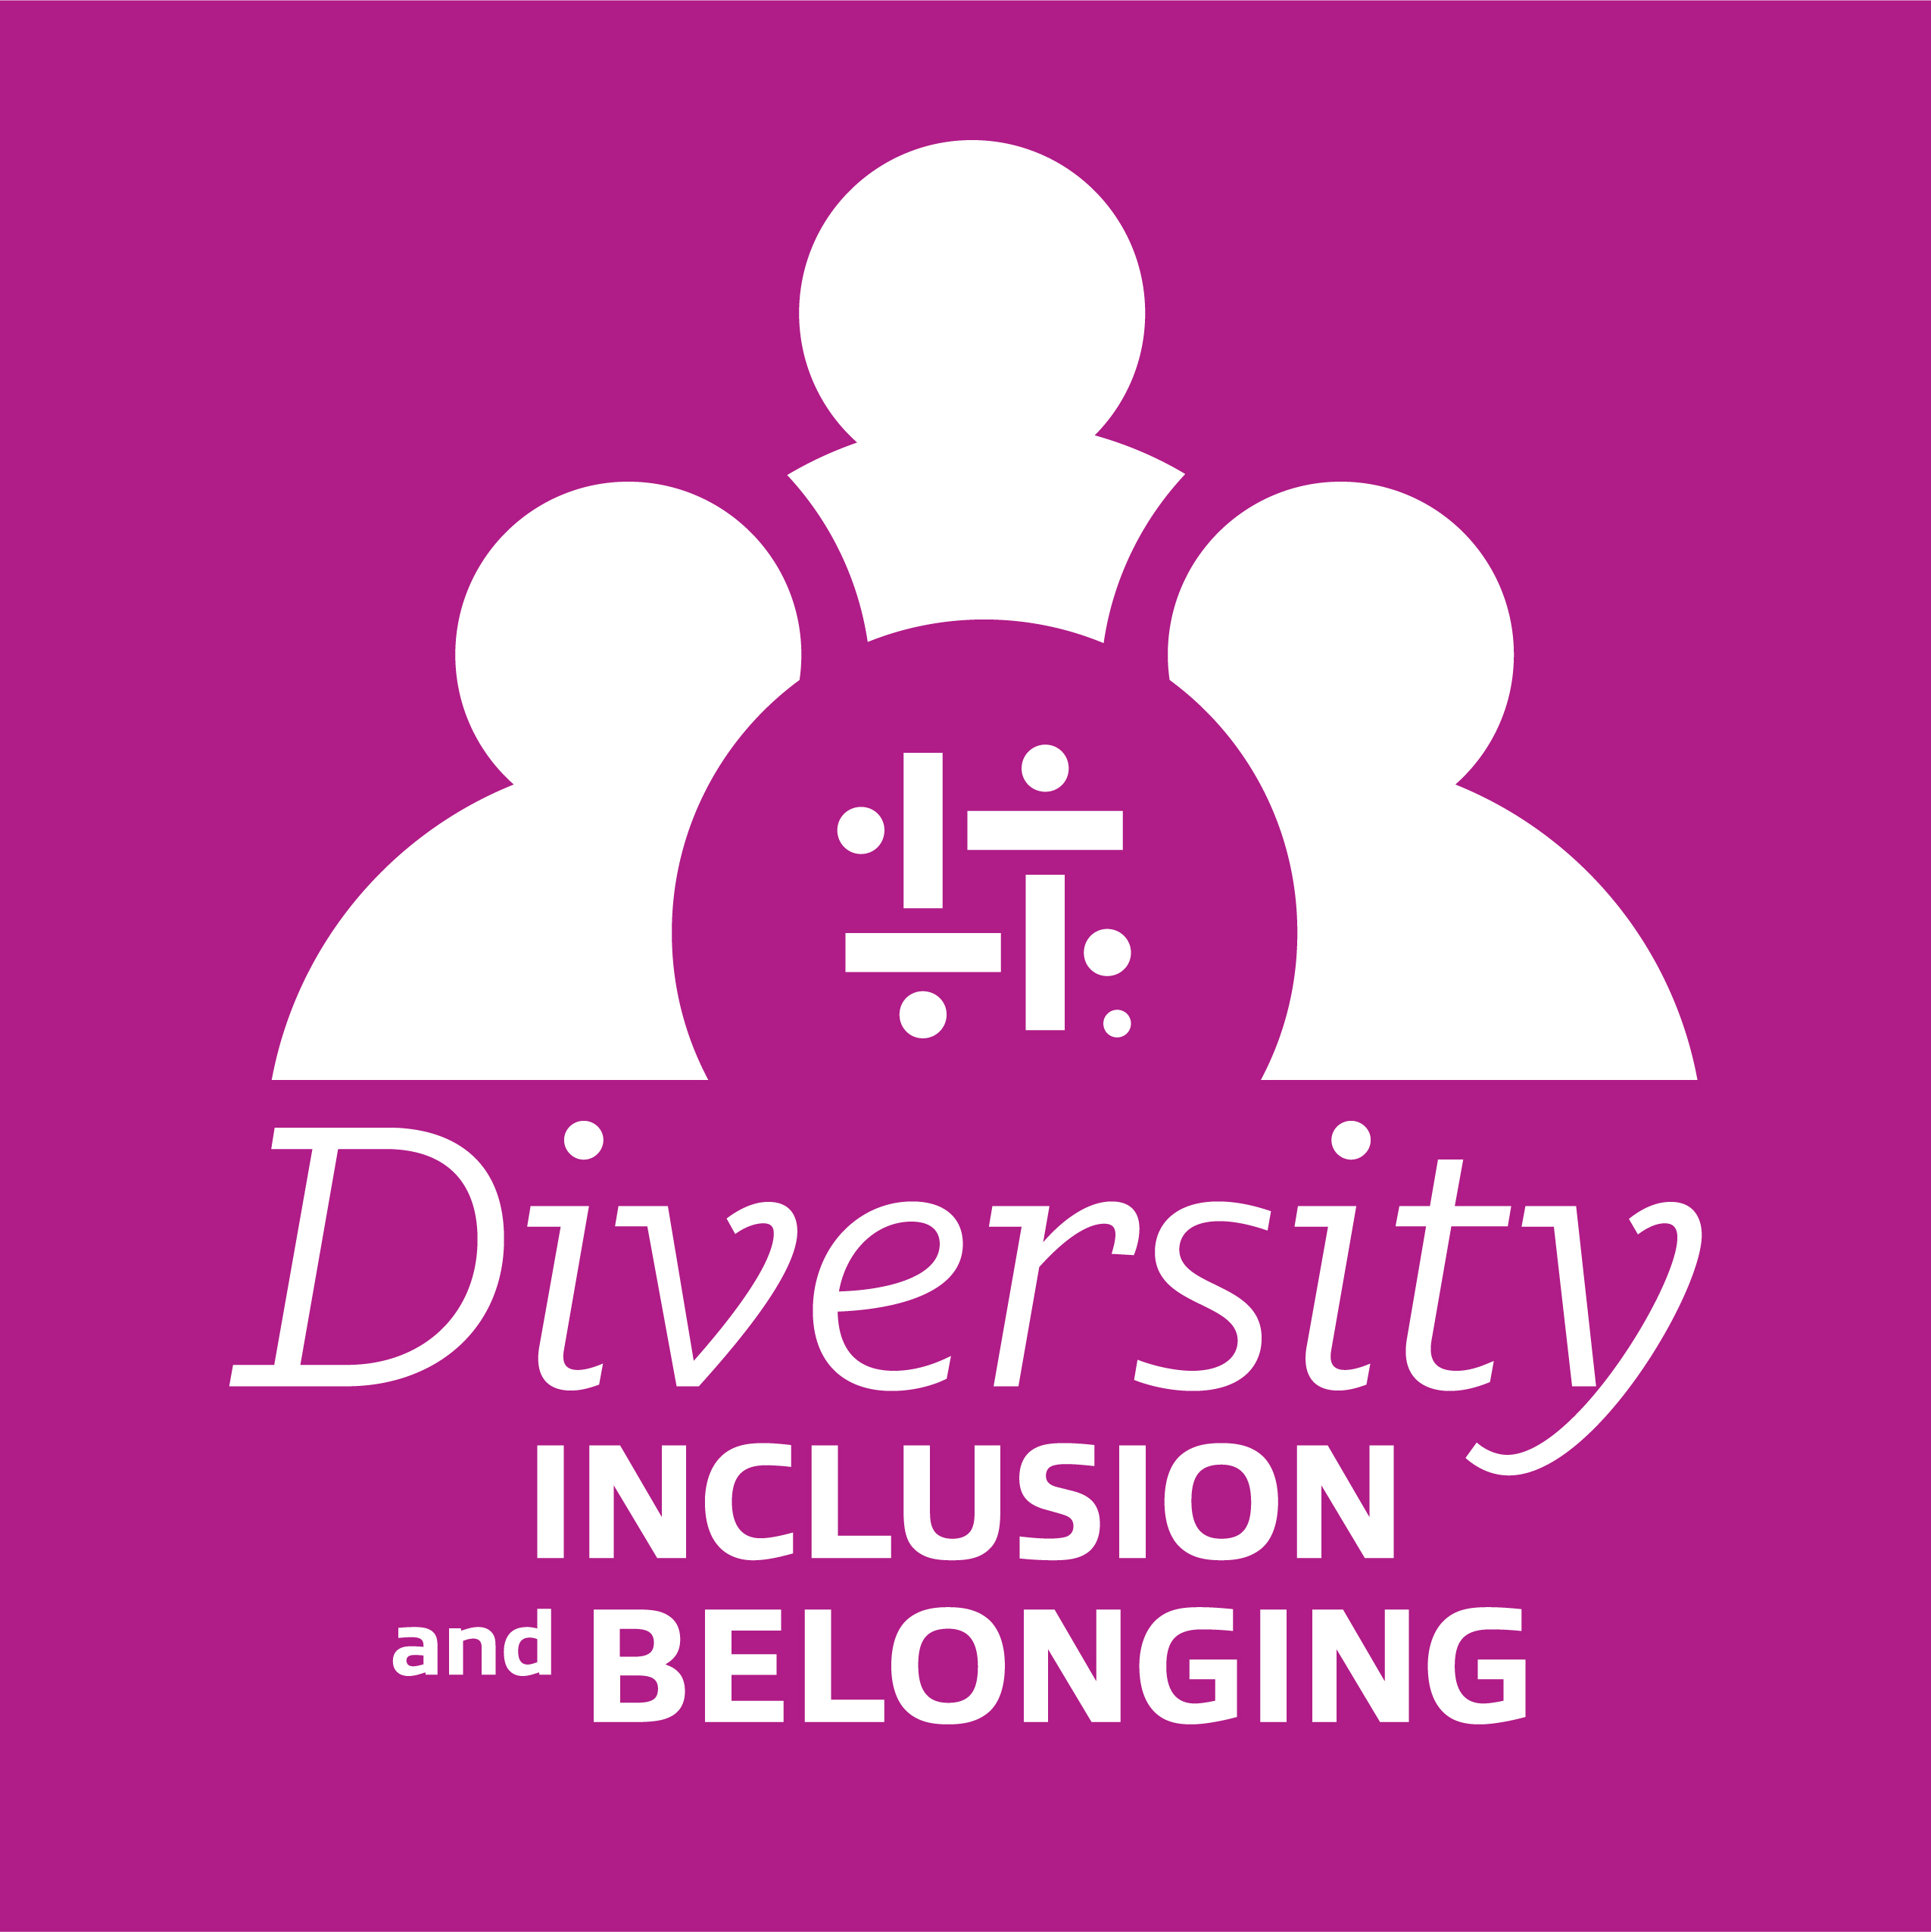 Insight diversity and inclusion